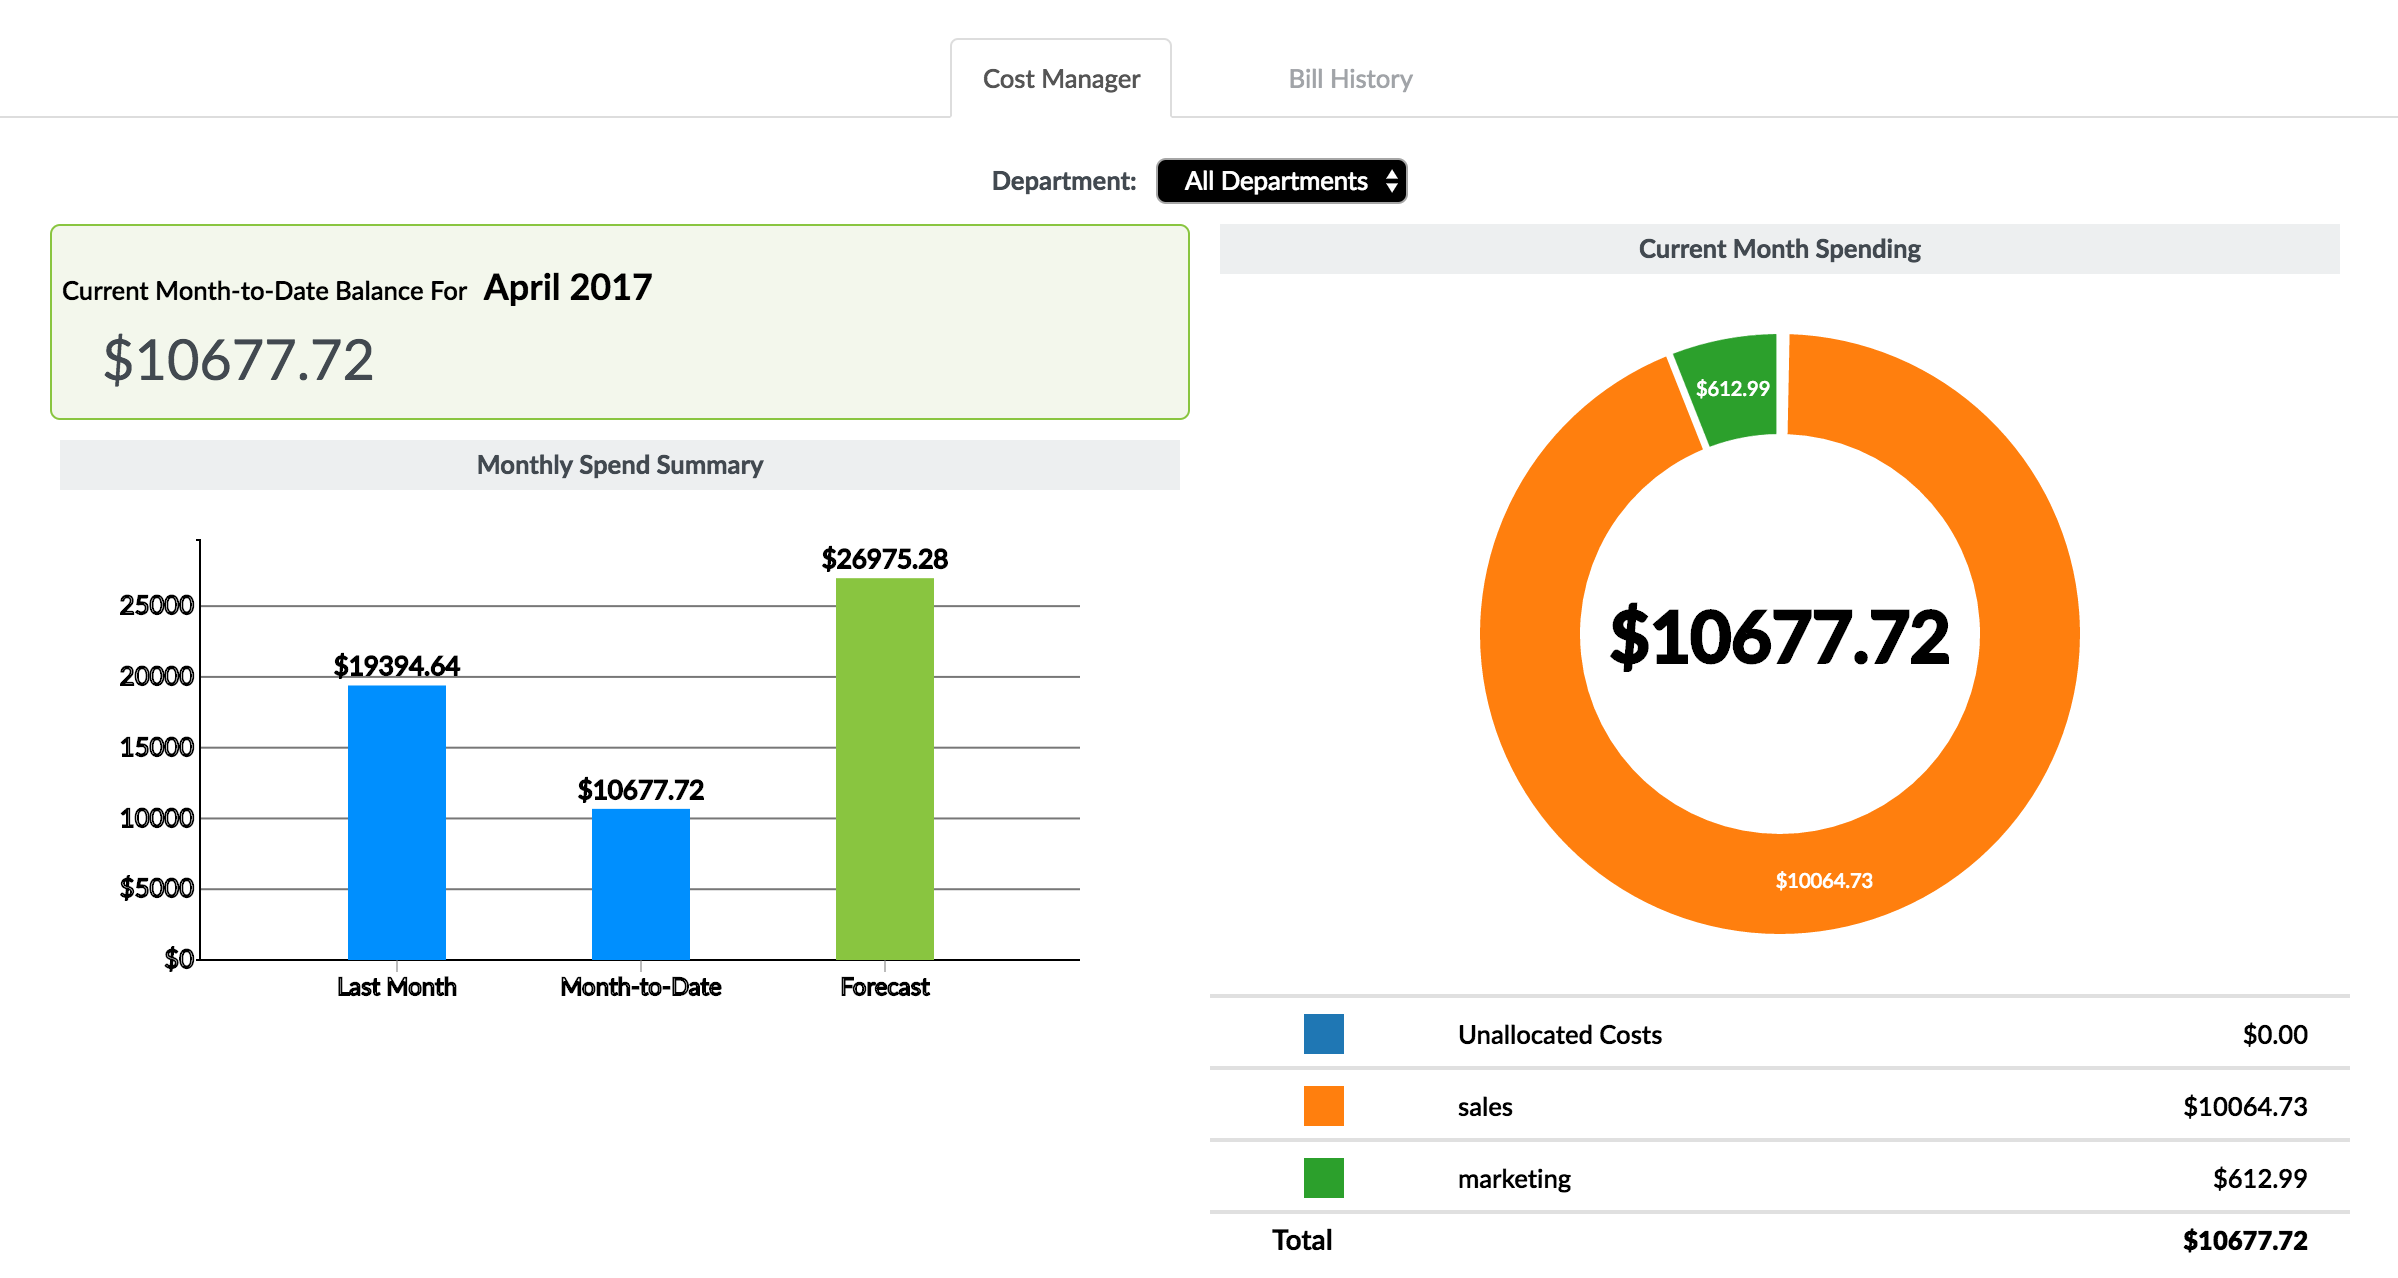 Cost Manager Chargeback Details